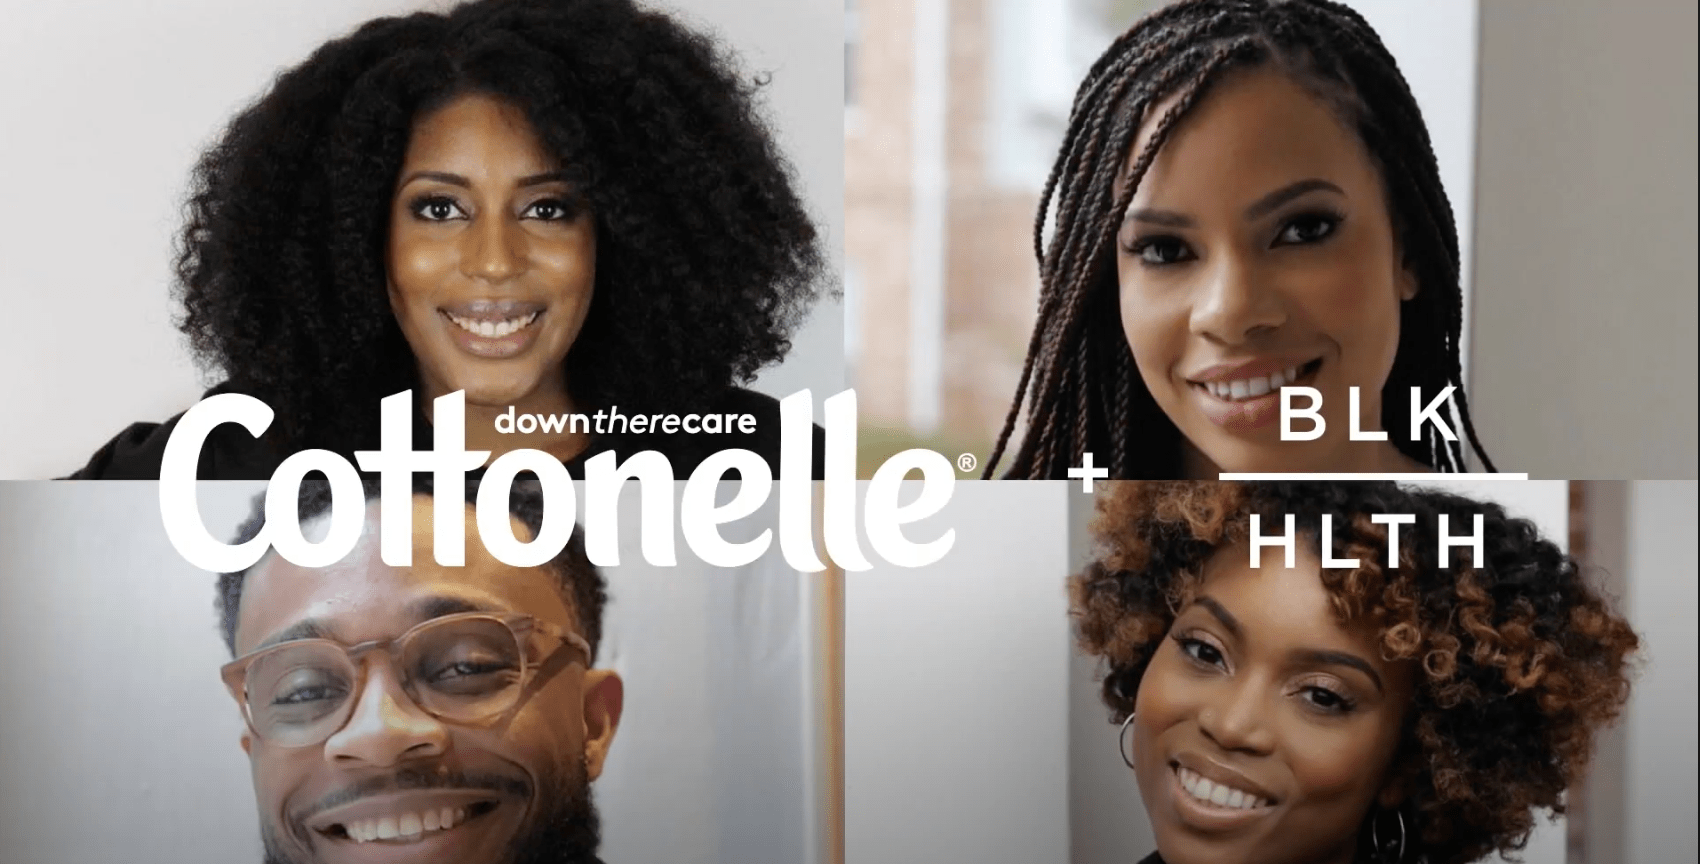 Cottonelle Teams Up With BLKHLTH To Fight Colon Cancer & Racial Disparities